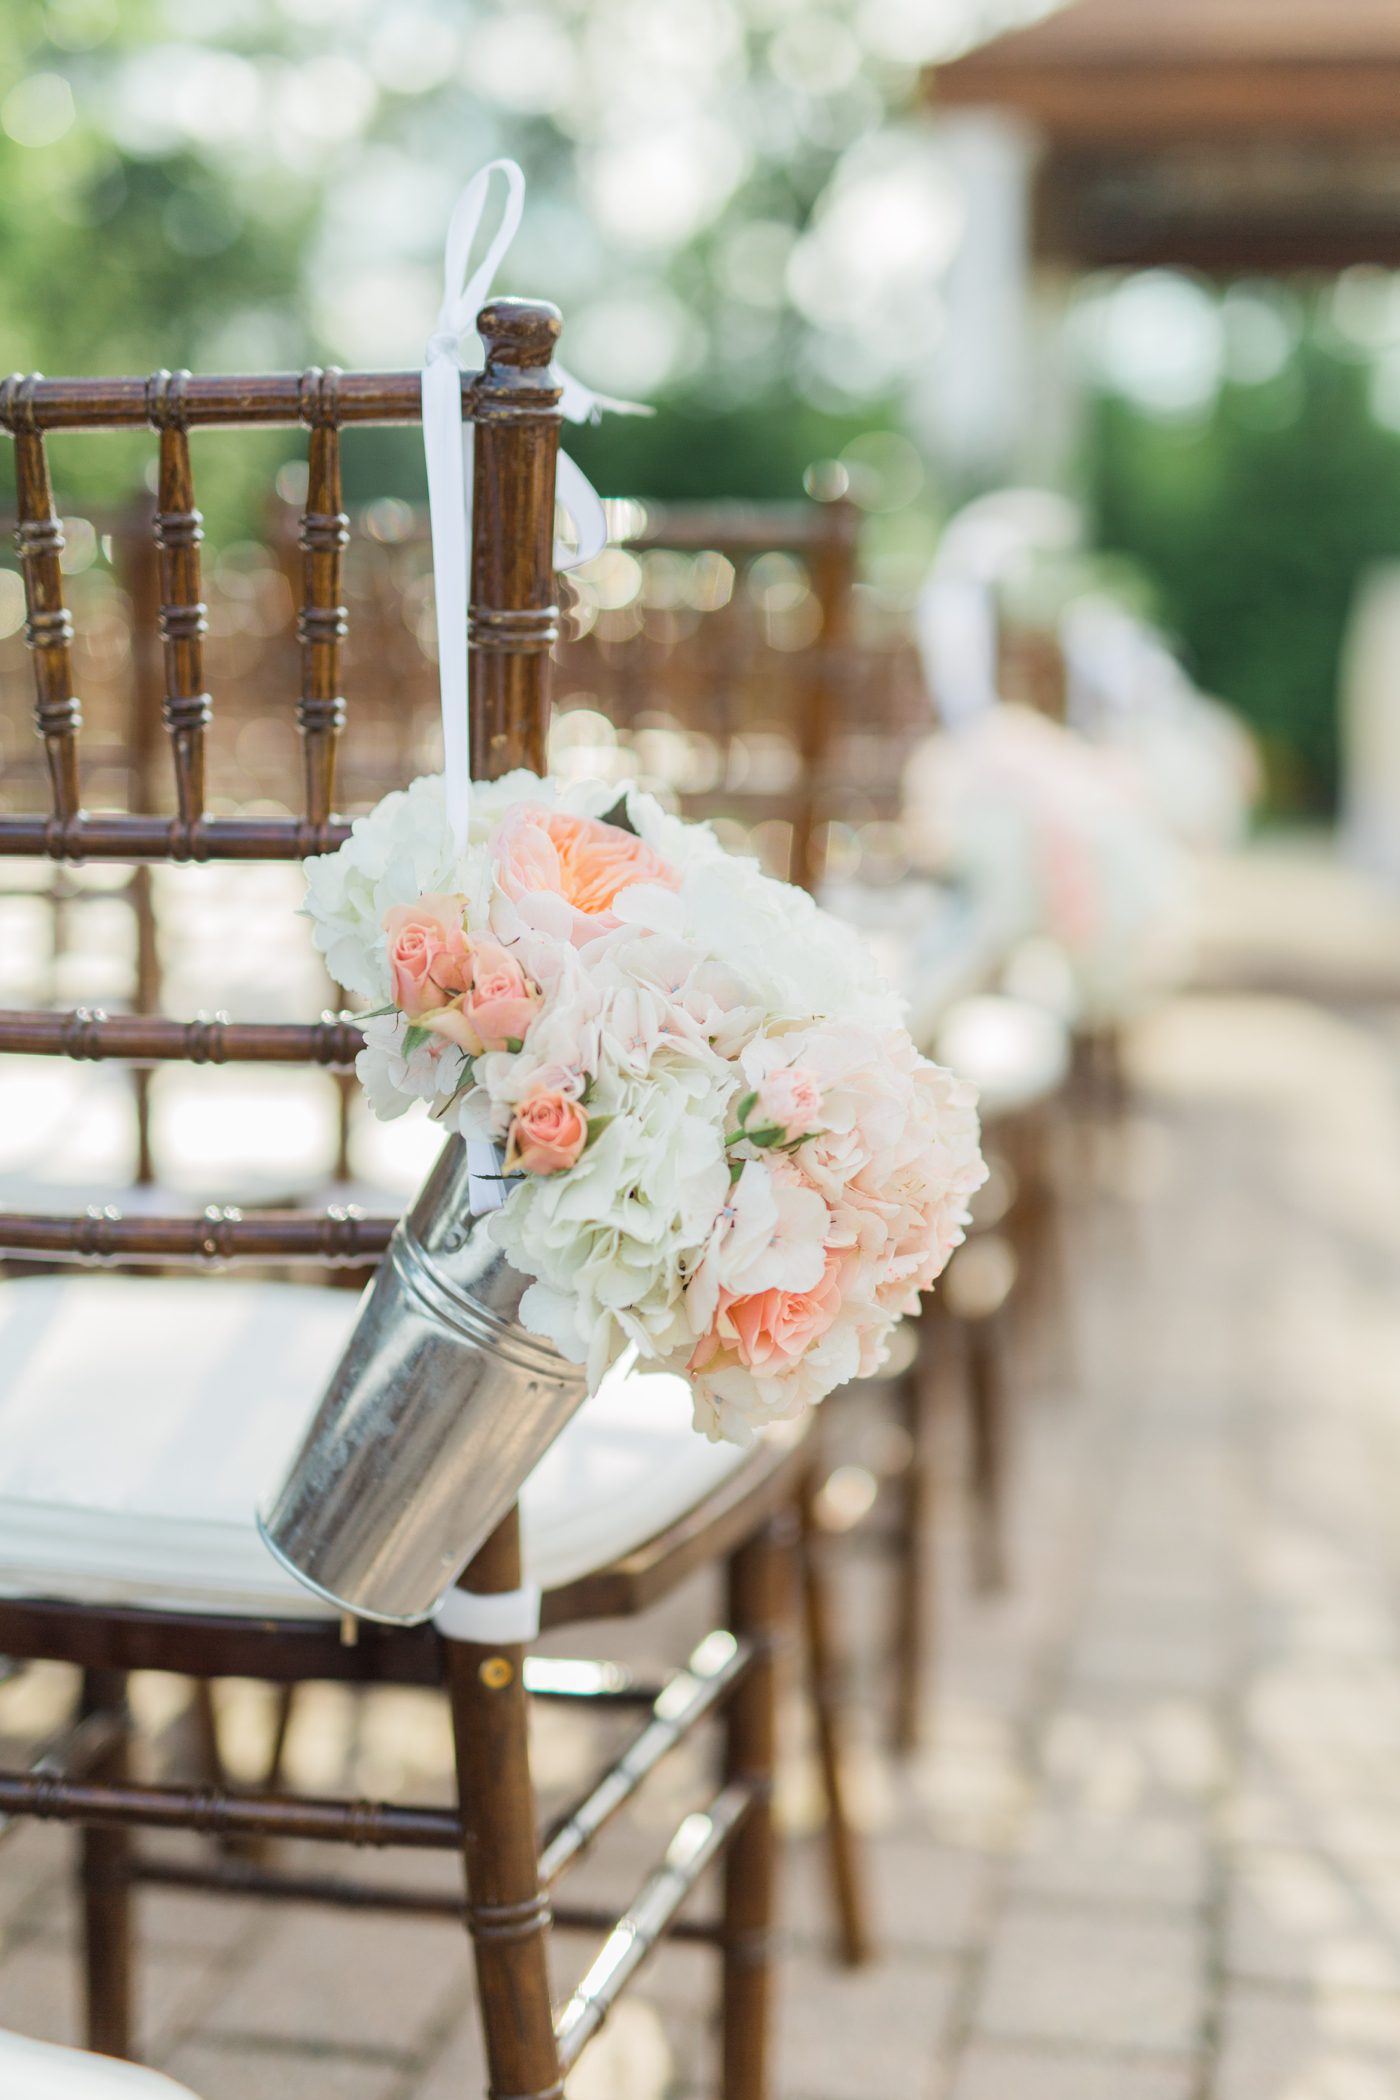 Beautiful outdoor ceremony wooden chairs with flowers